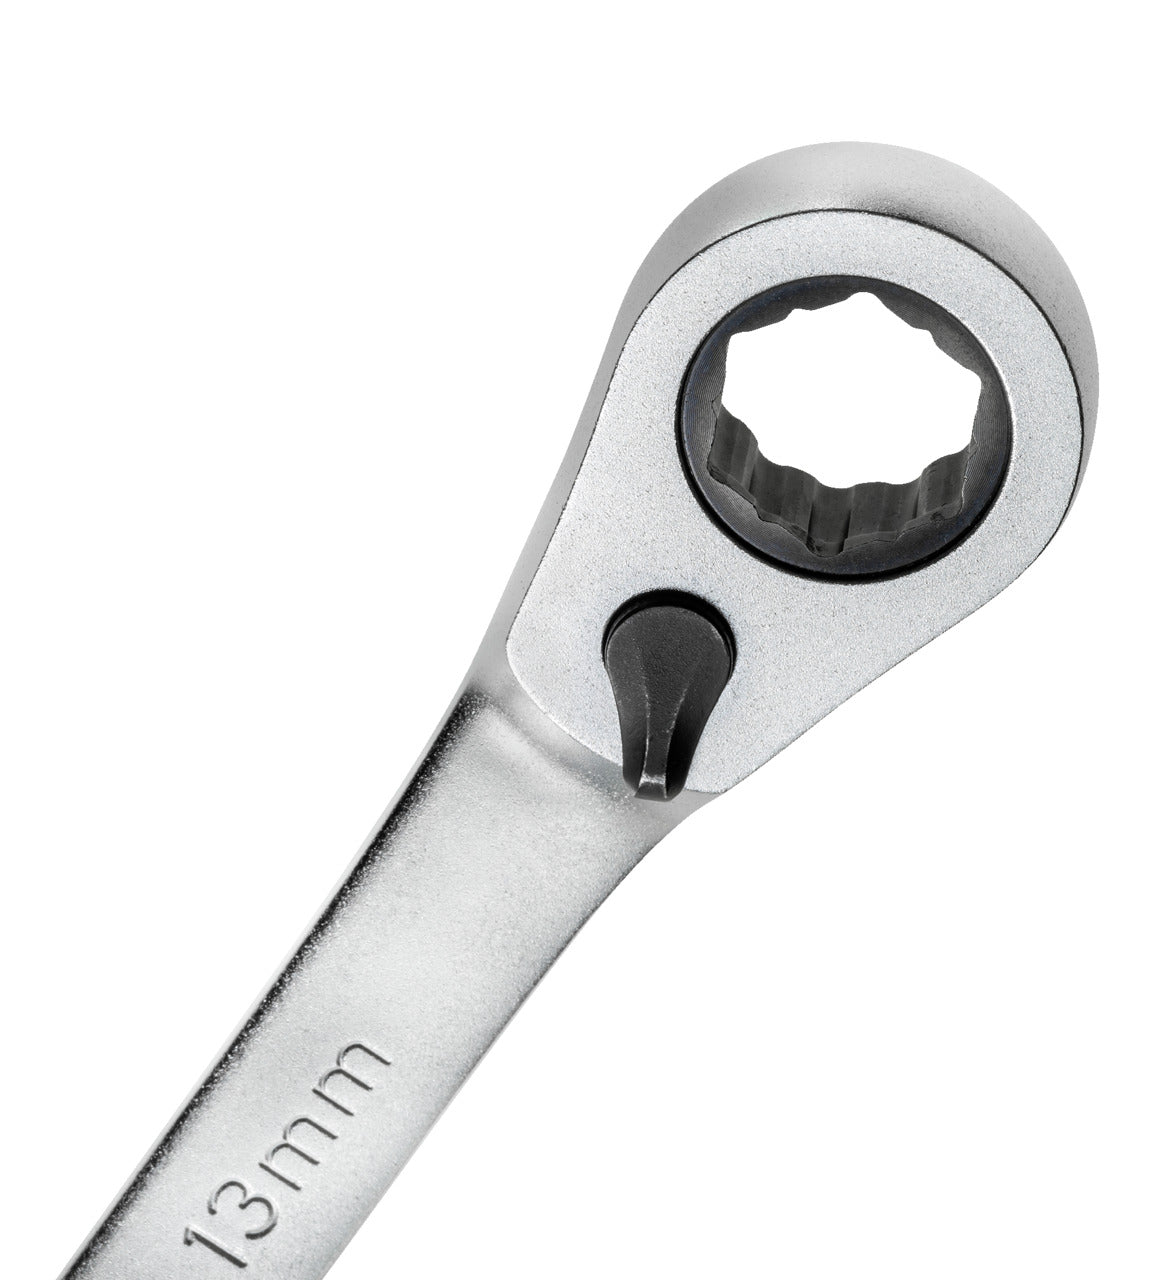 GEDOREred R07201100 - Reversible ratchet combination wrench with clamping function, 10mm (3301004)